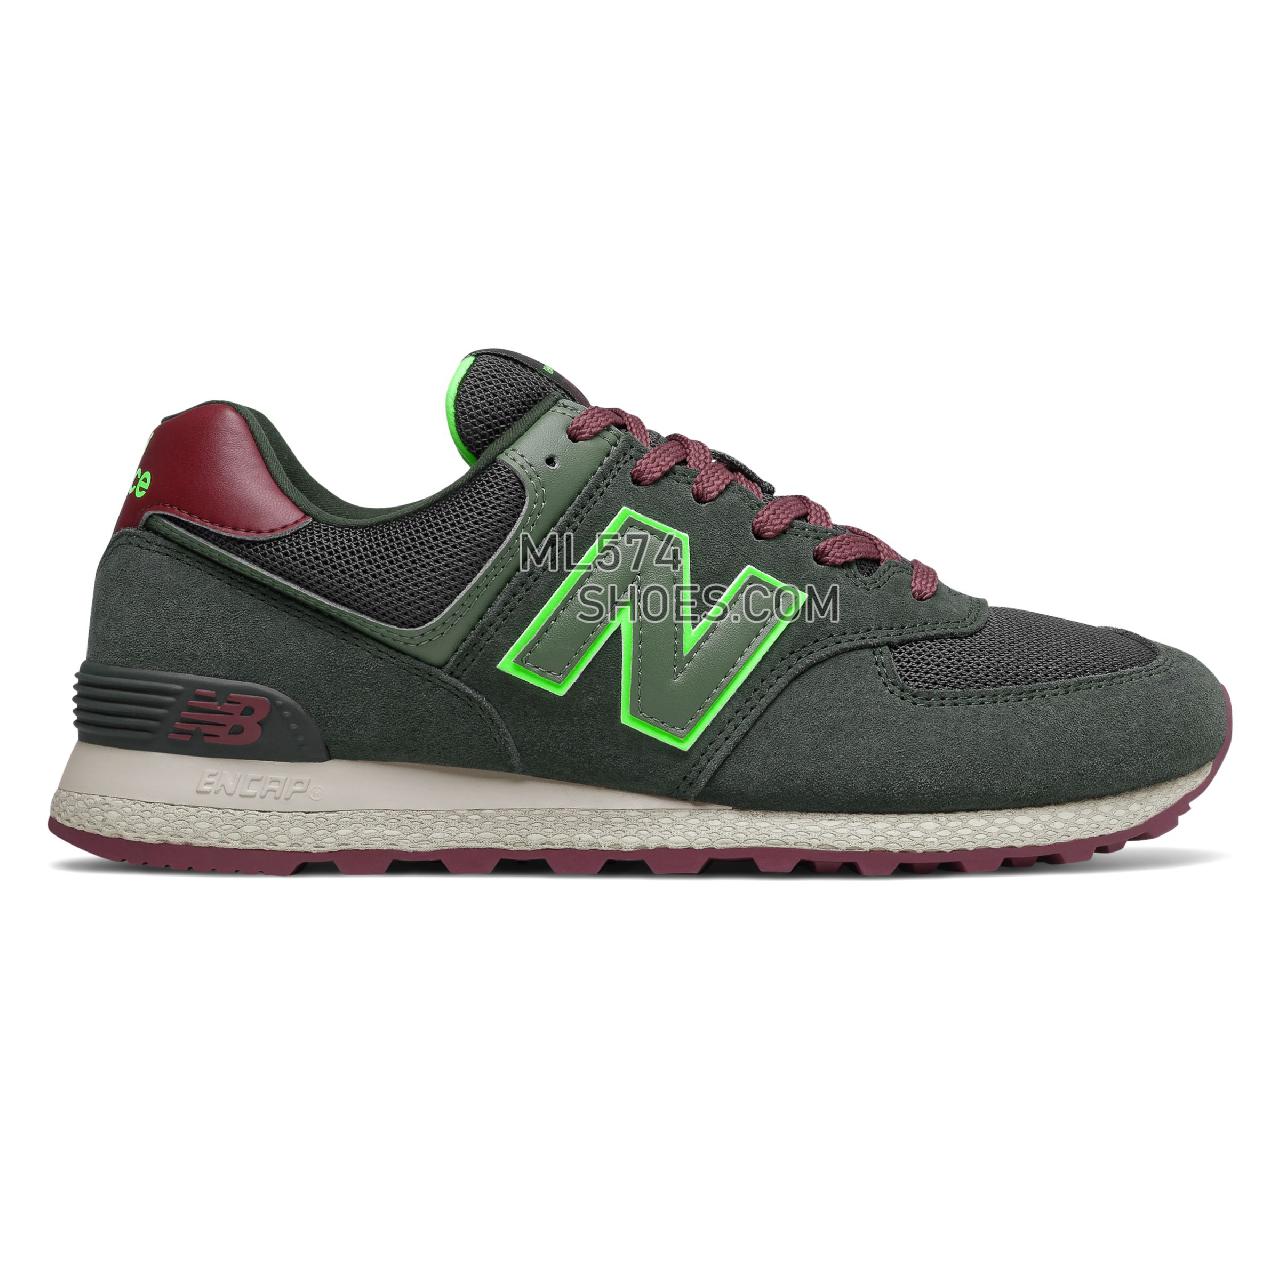 New Balance MT574V2 - Men's Classic Sneakers - Dark Olive with Energy Lime - MT574ATC